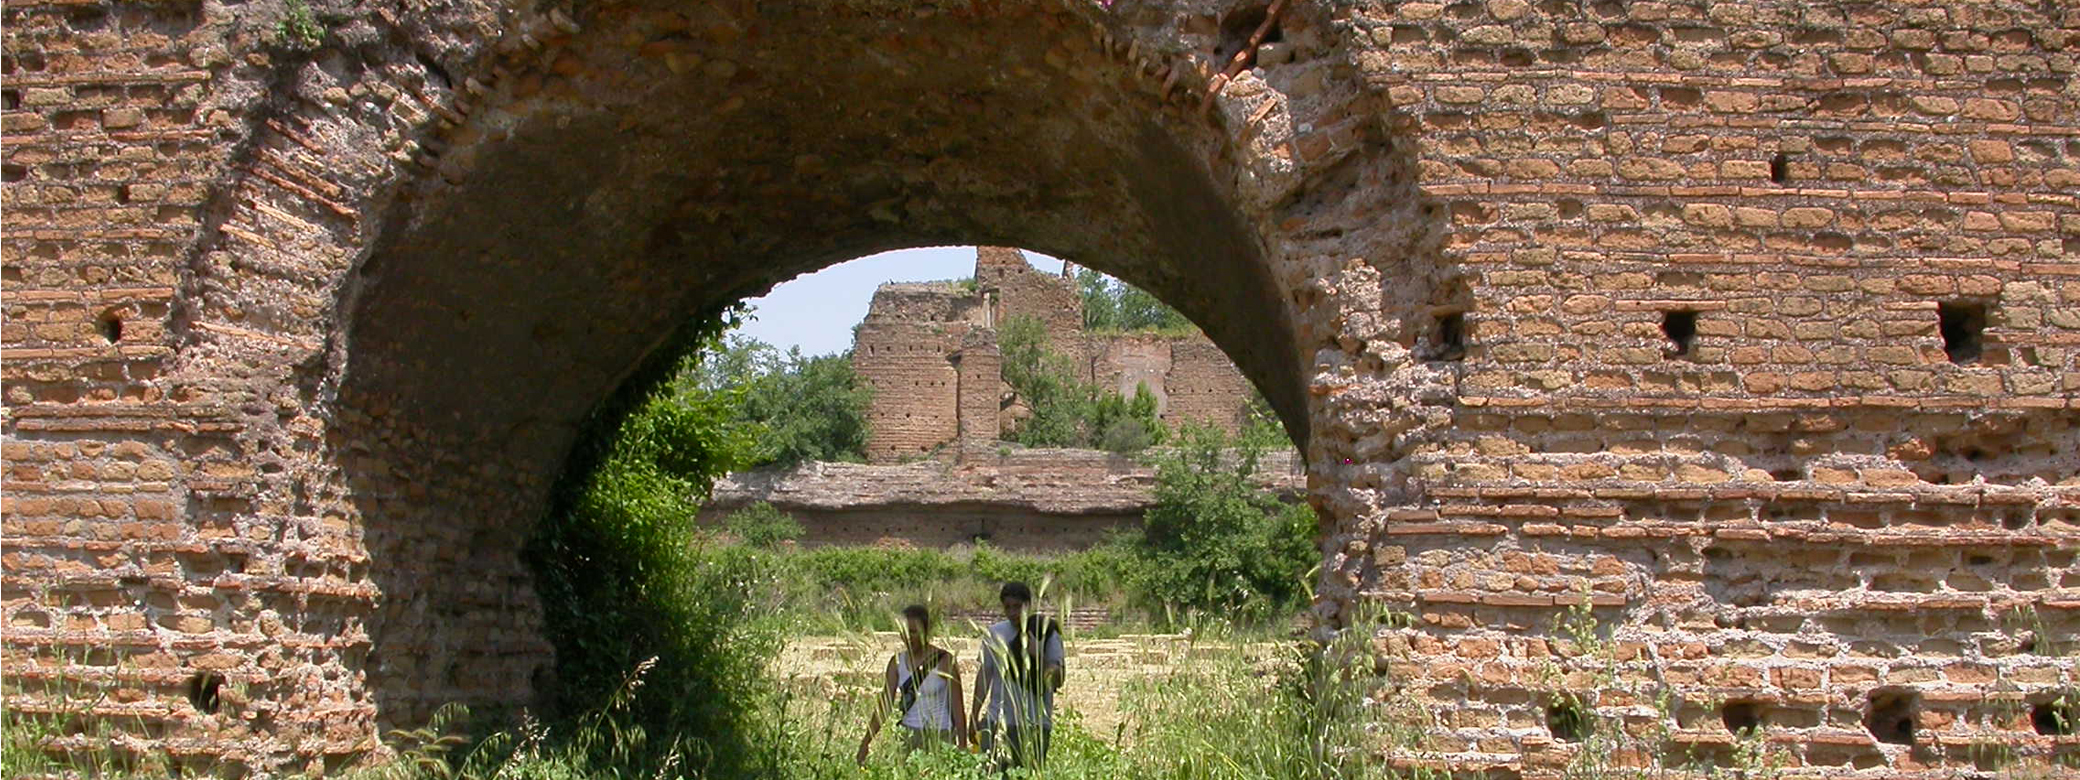 Two people walk under a brick arch in some ruins.